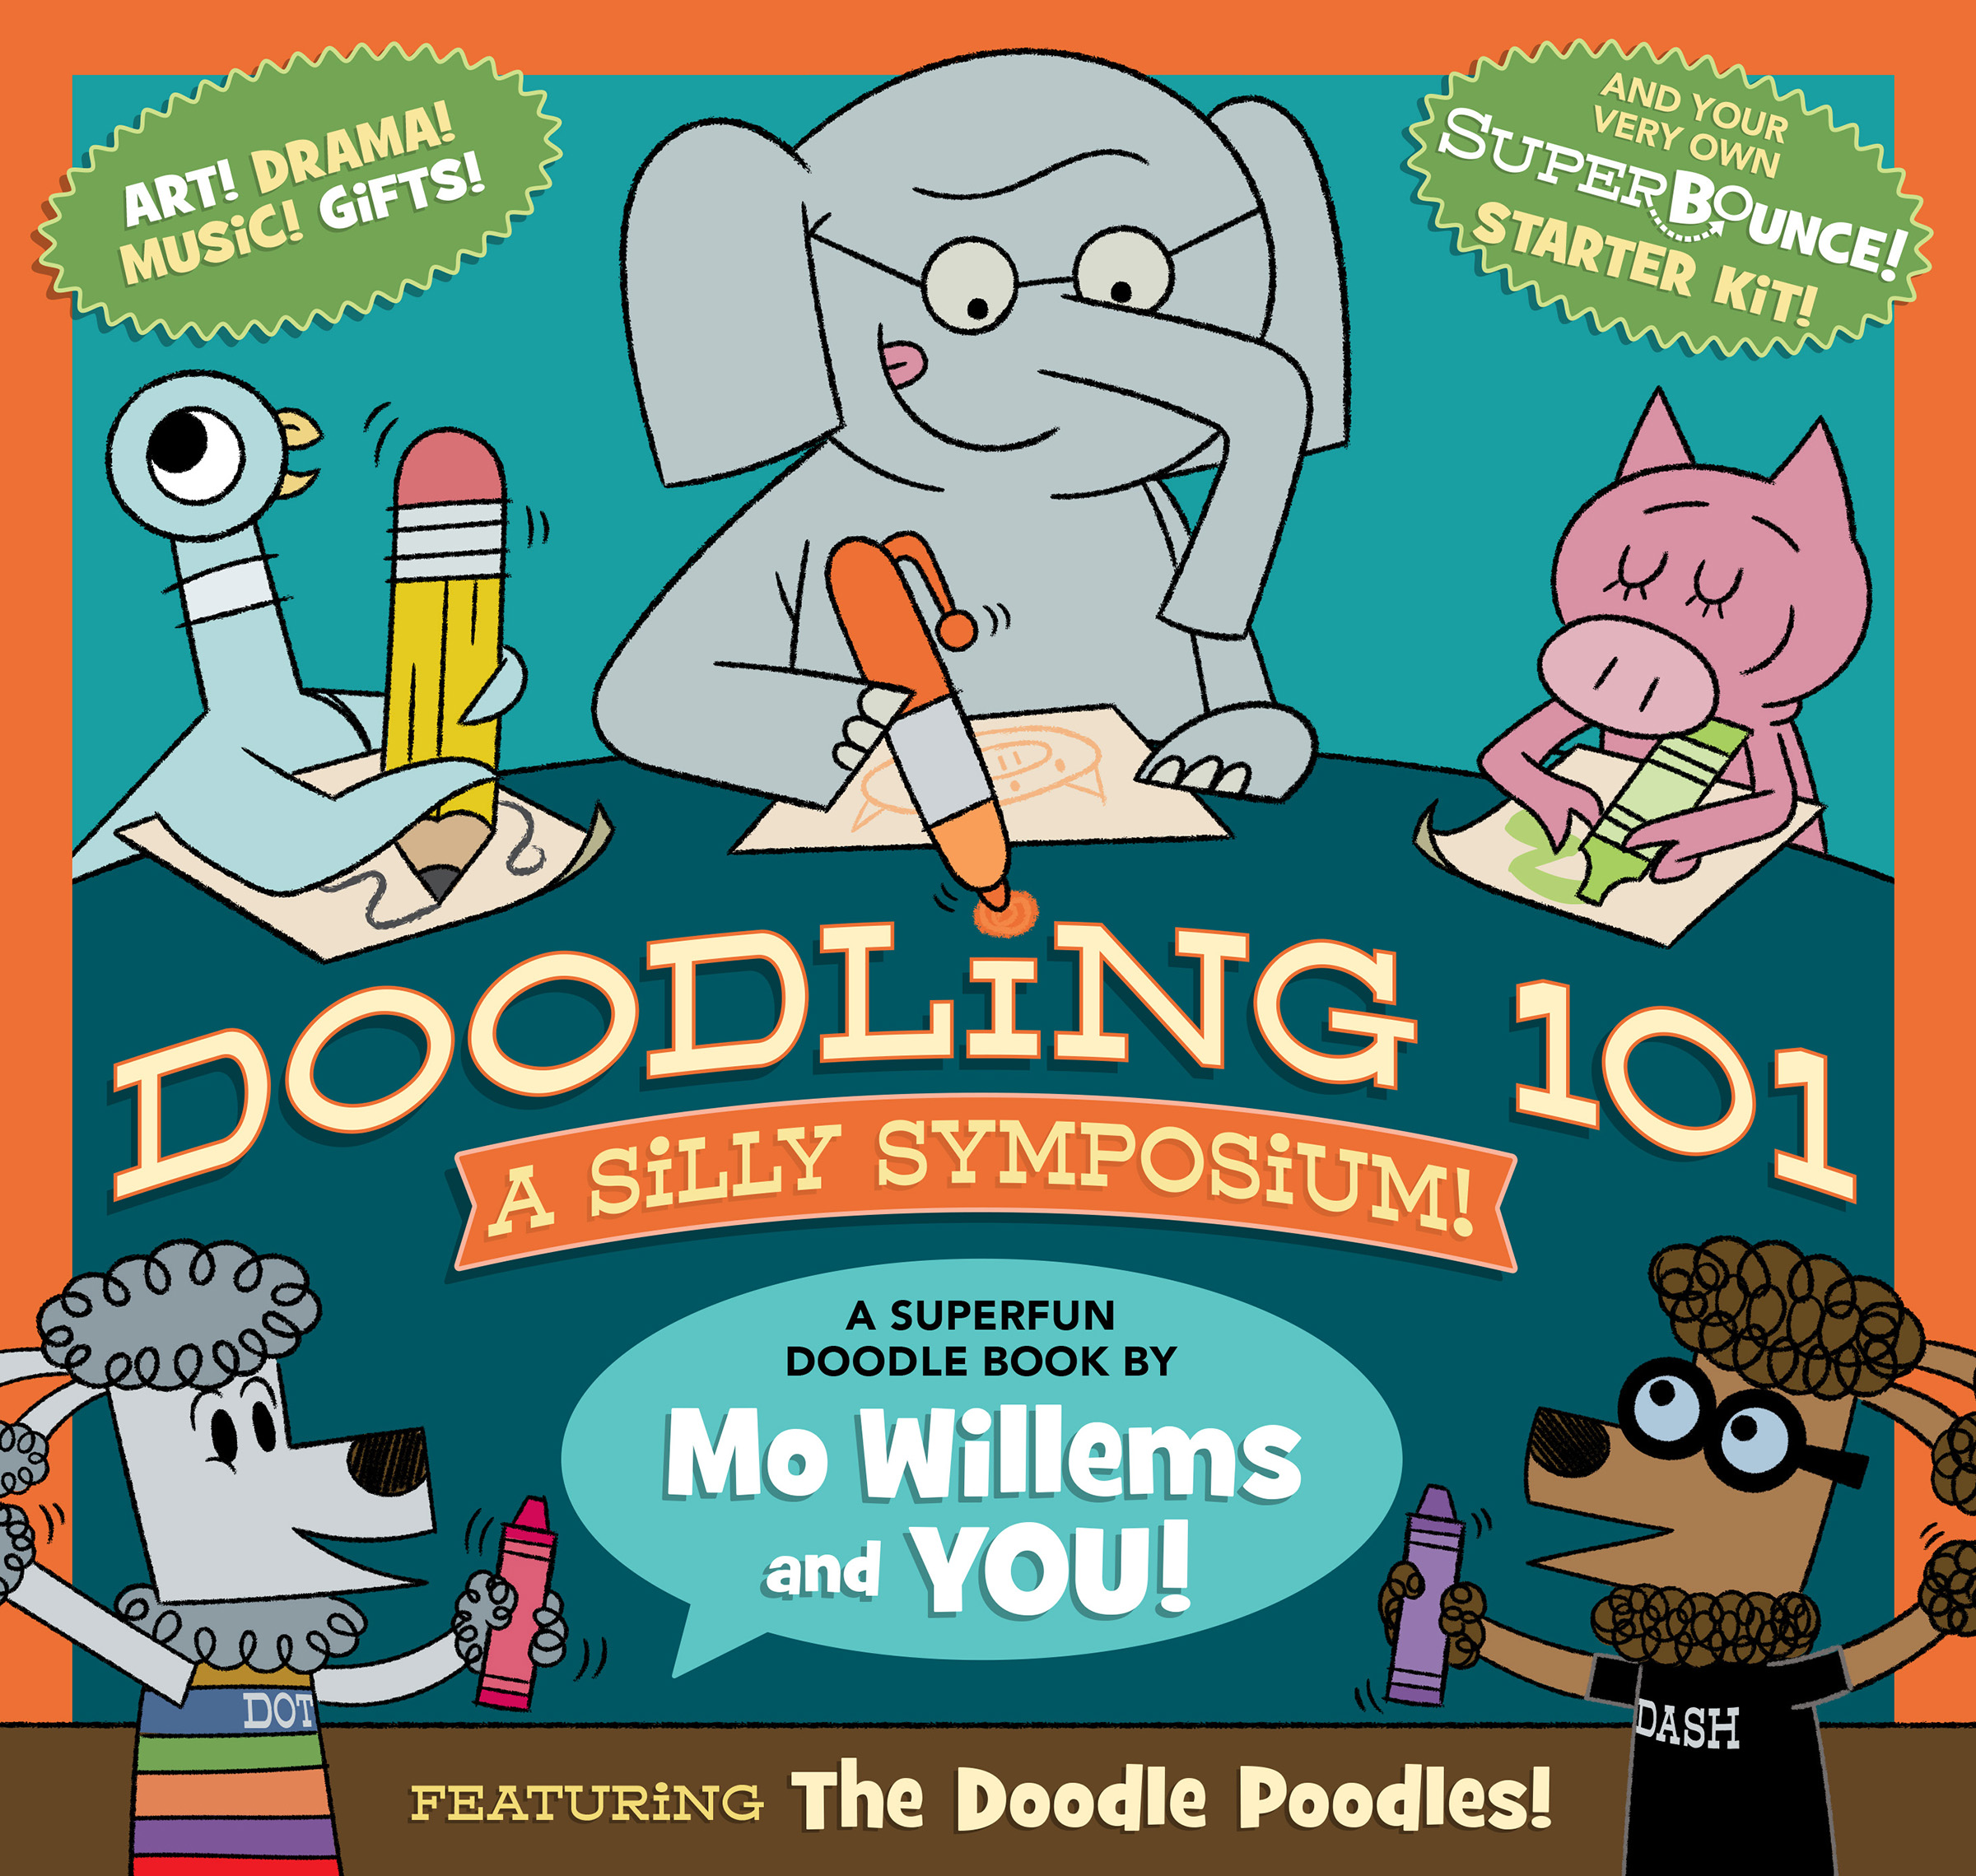 Doodling 101: A Silly Symposium!